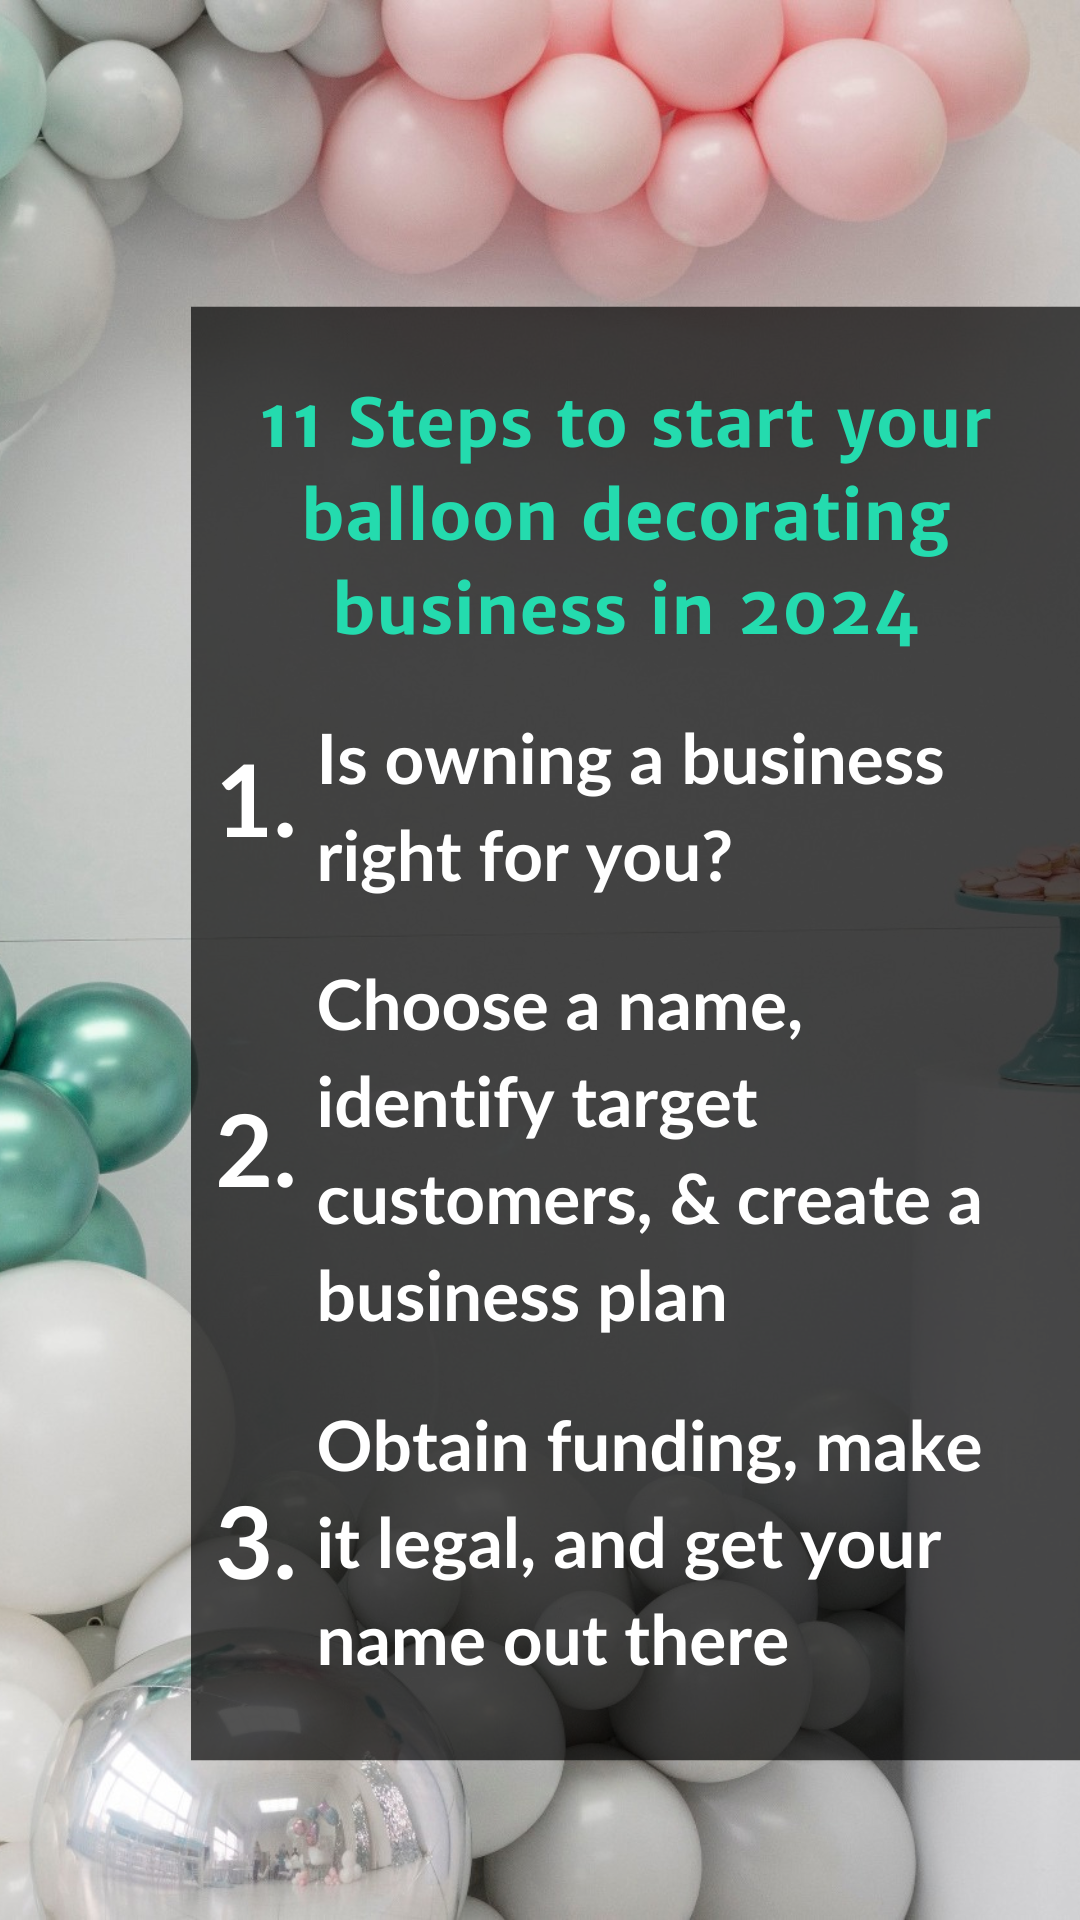 11 Steps to start your balloon decorating business in 2024